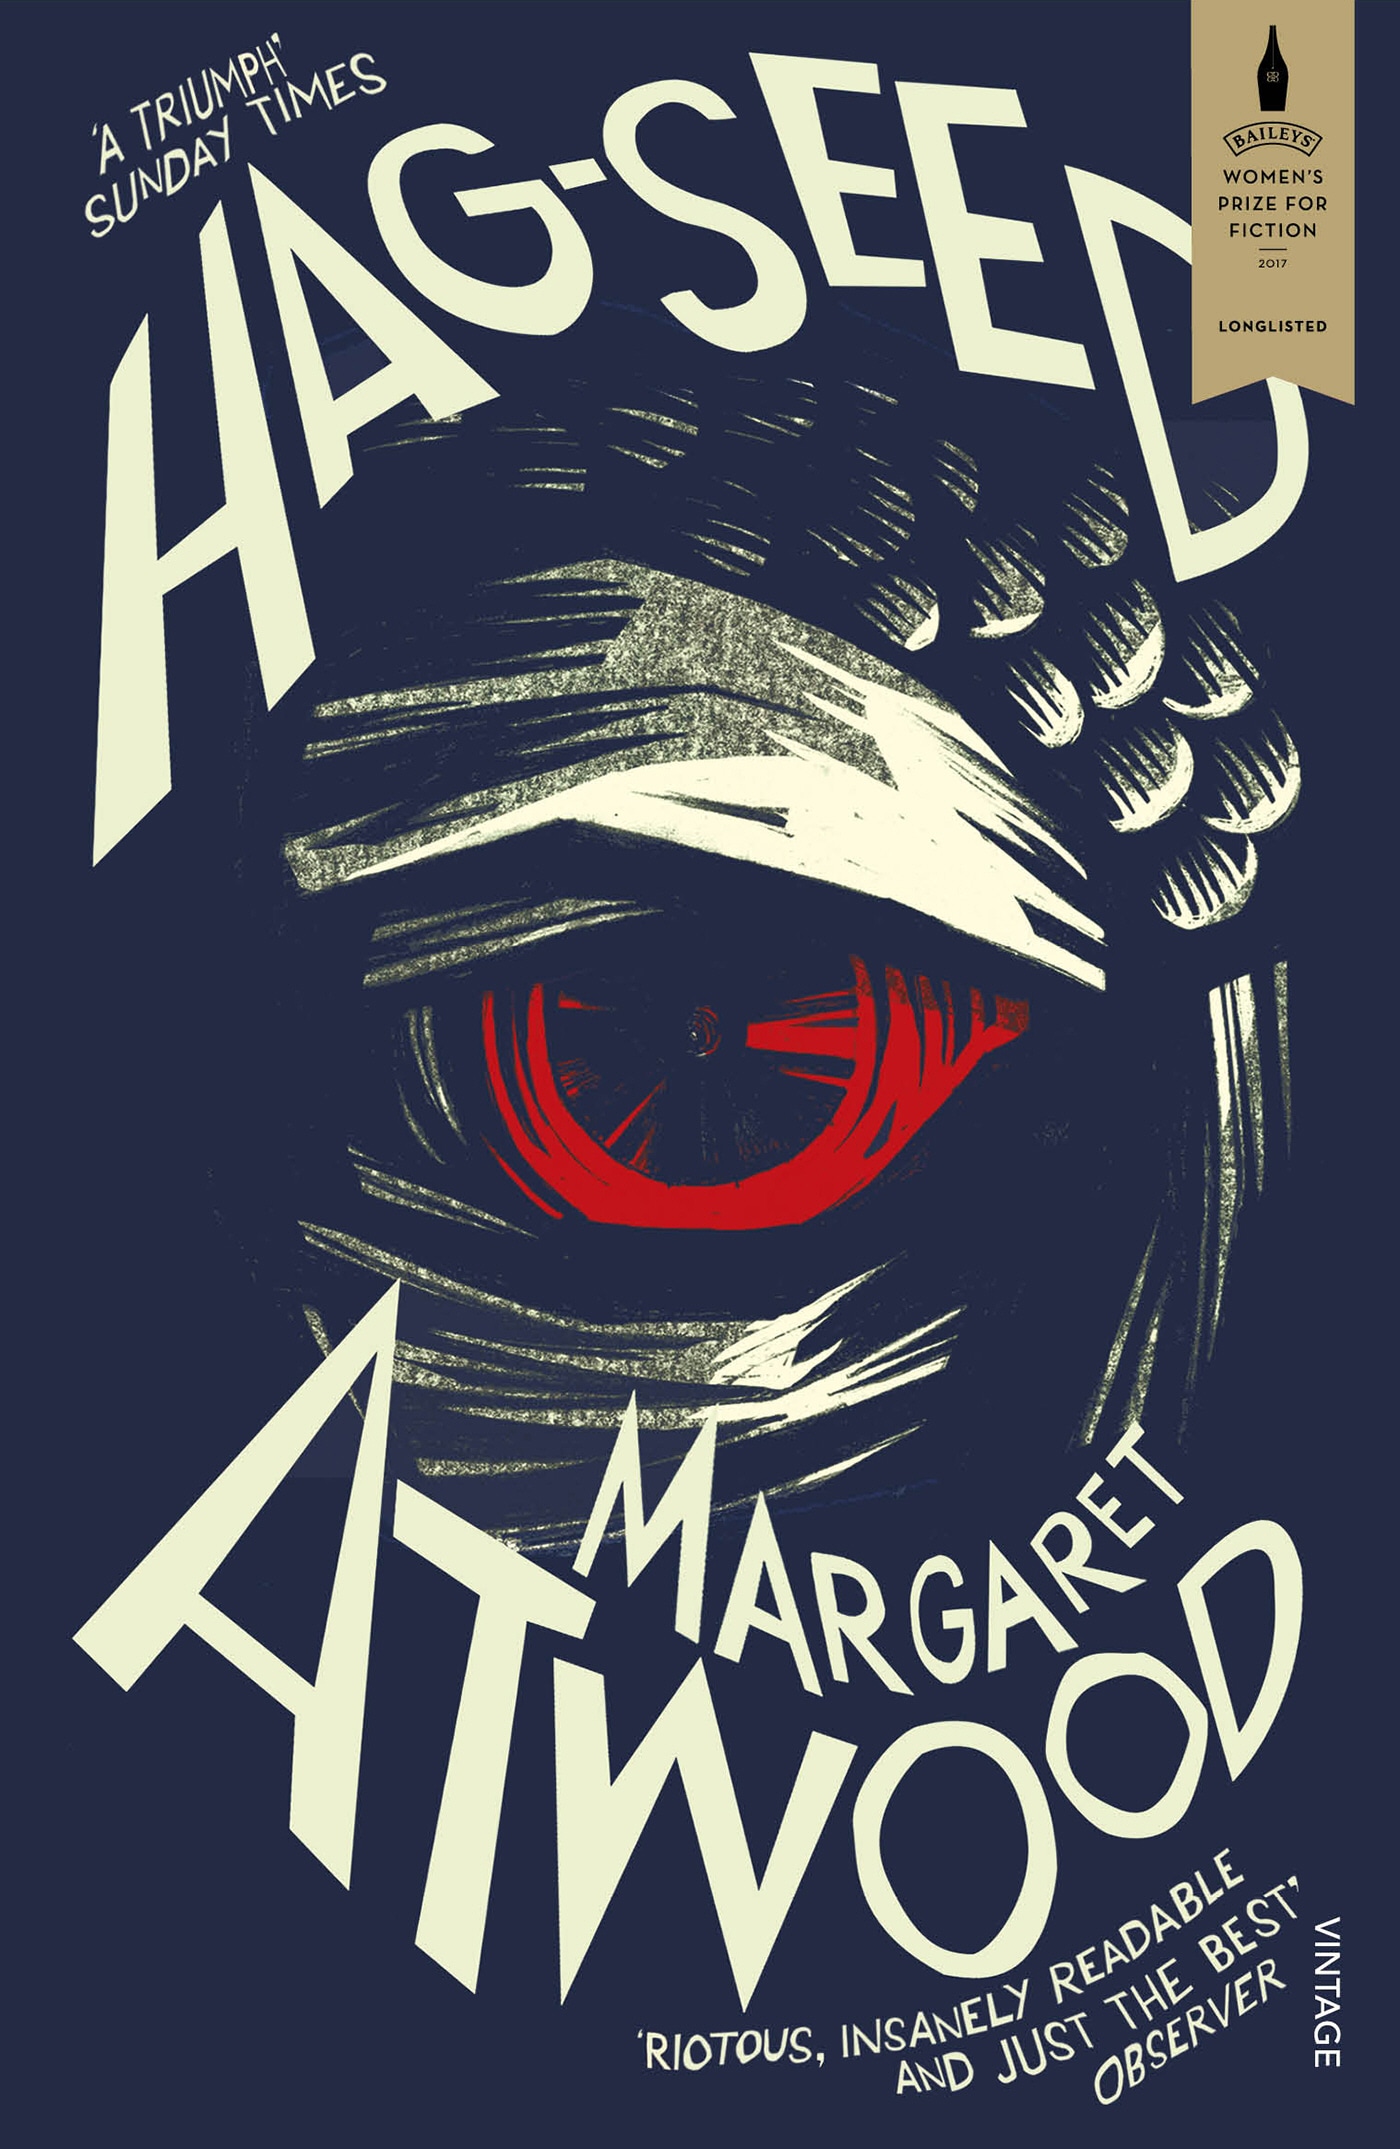 Book “Hag-Seed” by Margaret Atwood — August 3, 2017